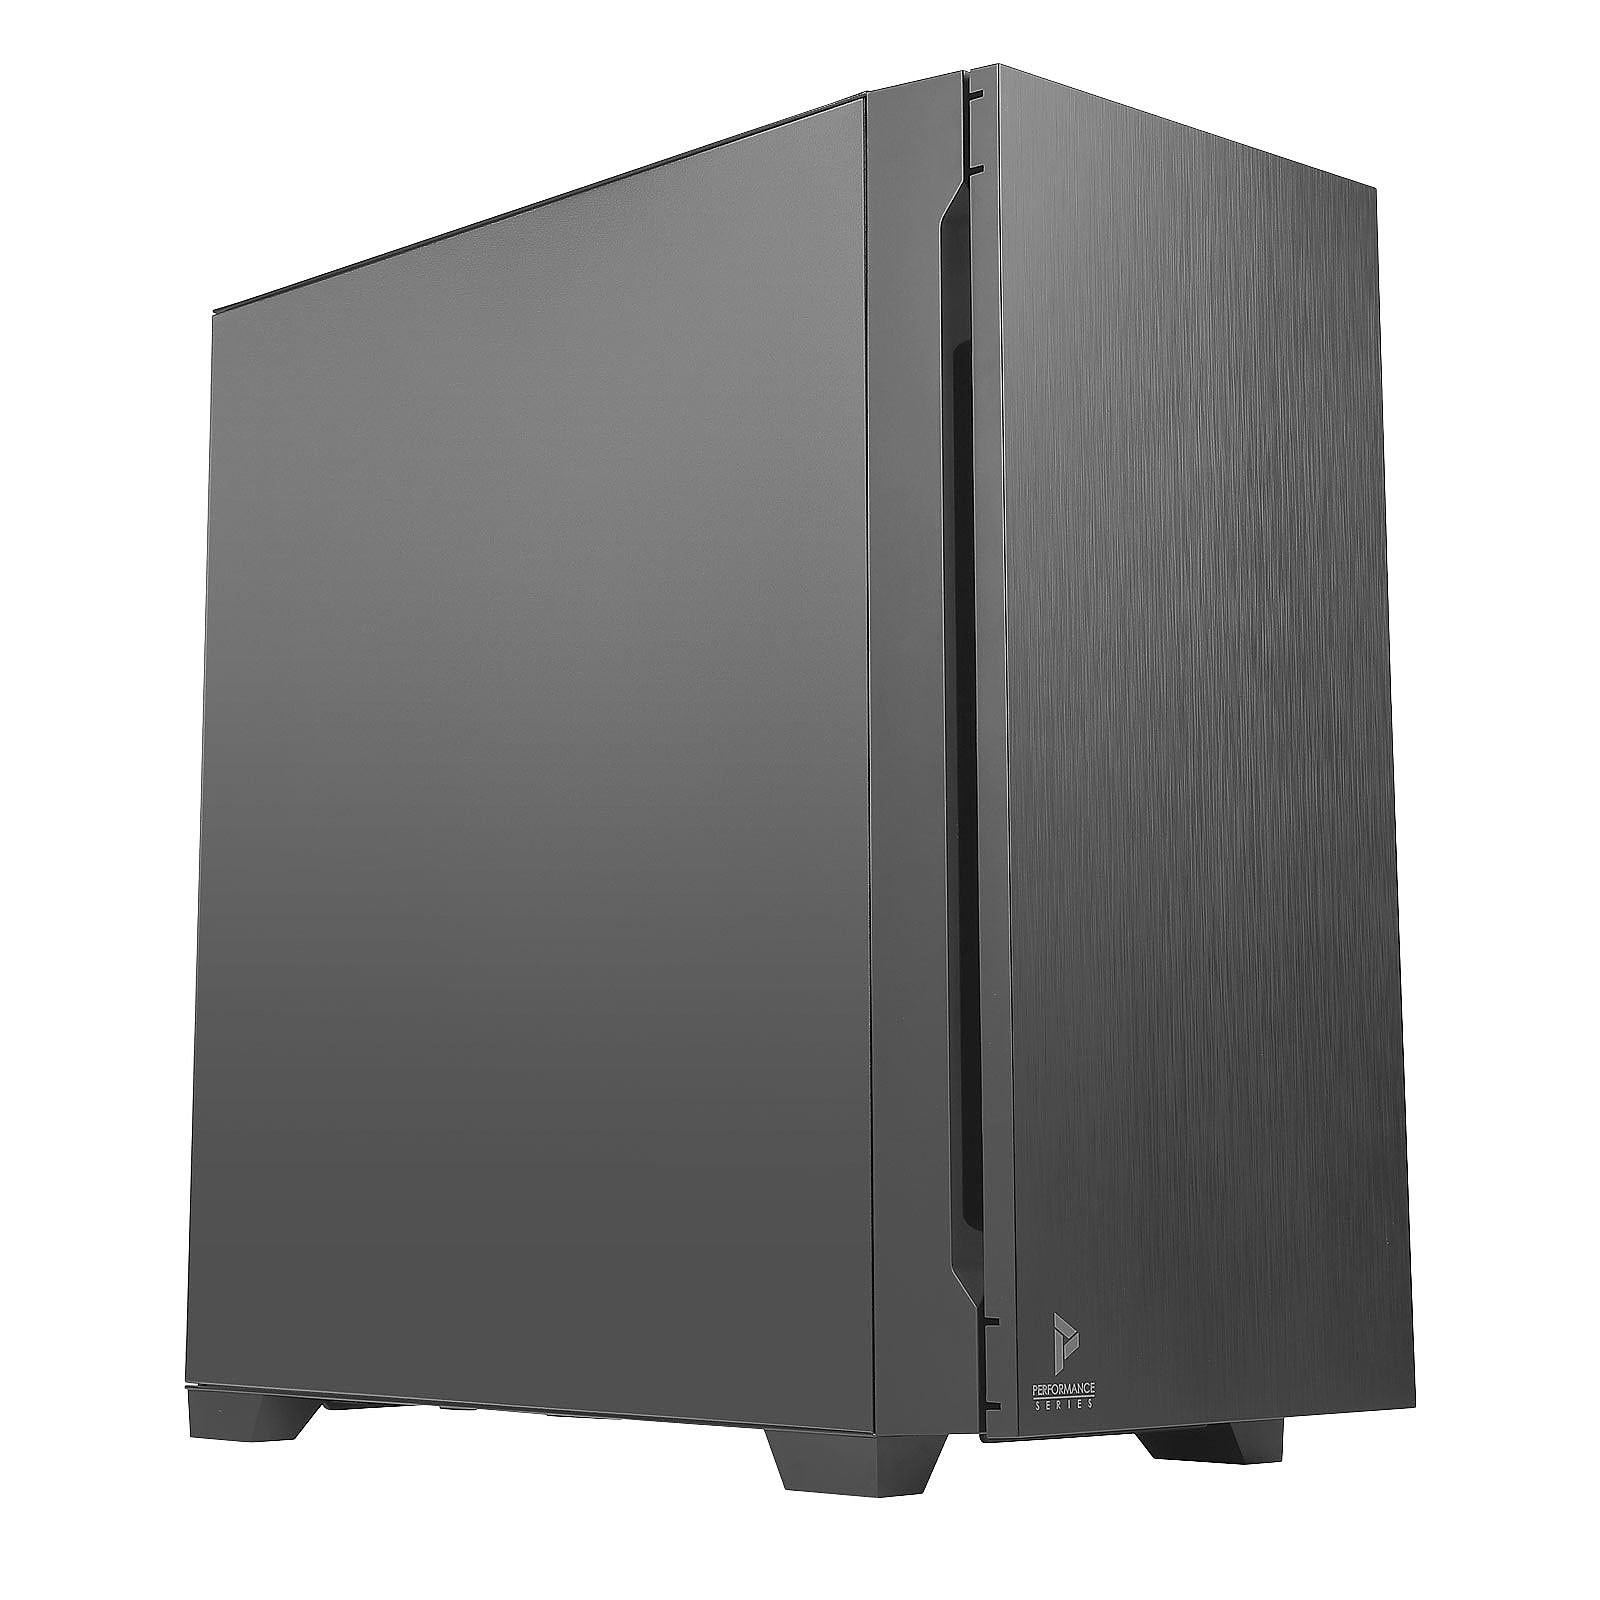 Antec, P10C, ATX, Silent, High, Airflow, Ultra, Sound, Dampening, from, 4, sides, 6x, HDDS, 5x, 120mm, Fans, Built, in, Fan, control, 